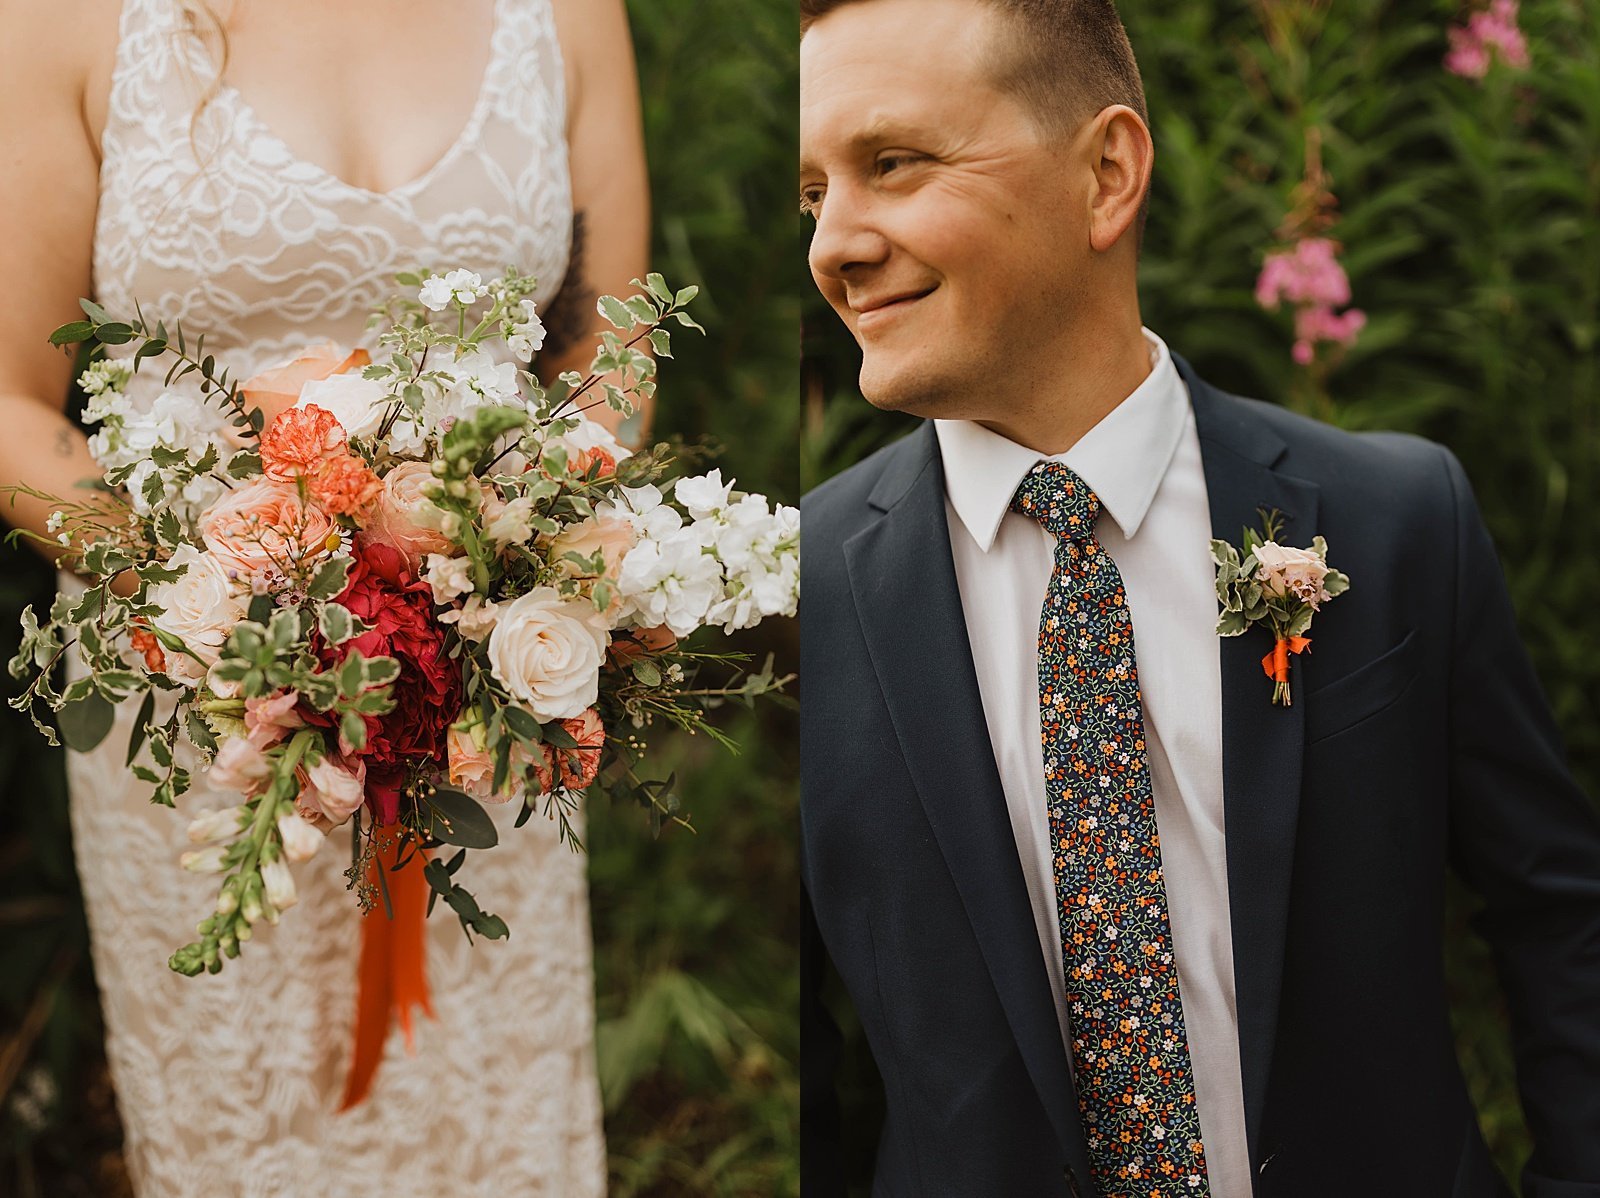  Bride and groom flower details by an Anchorage wedding photographer 